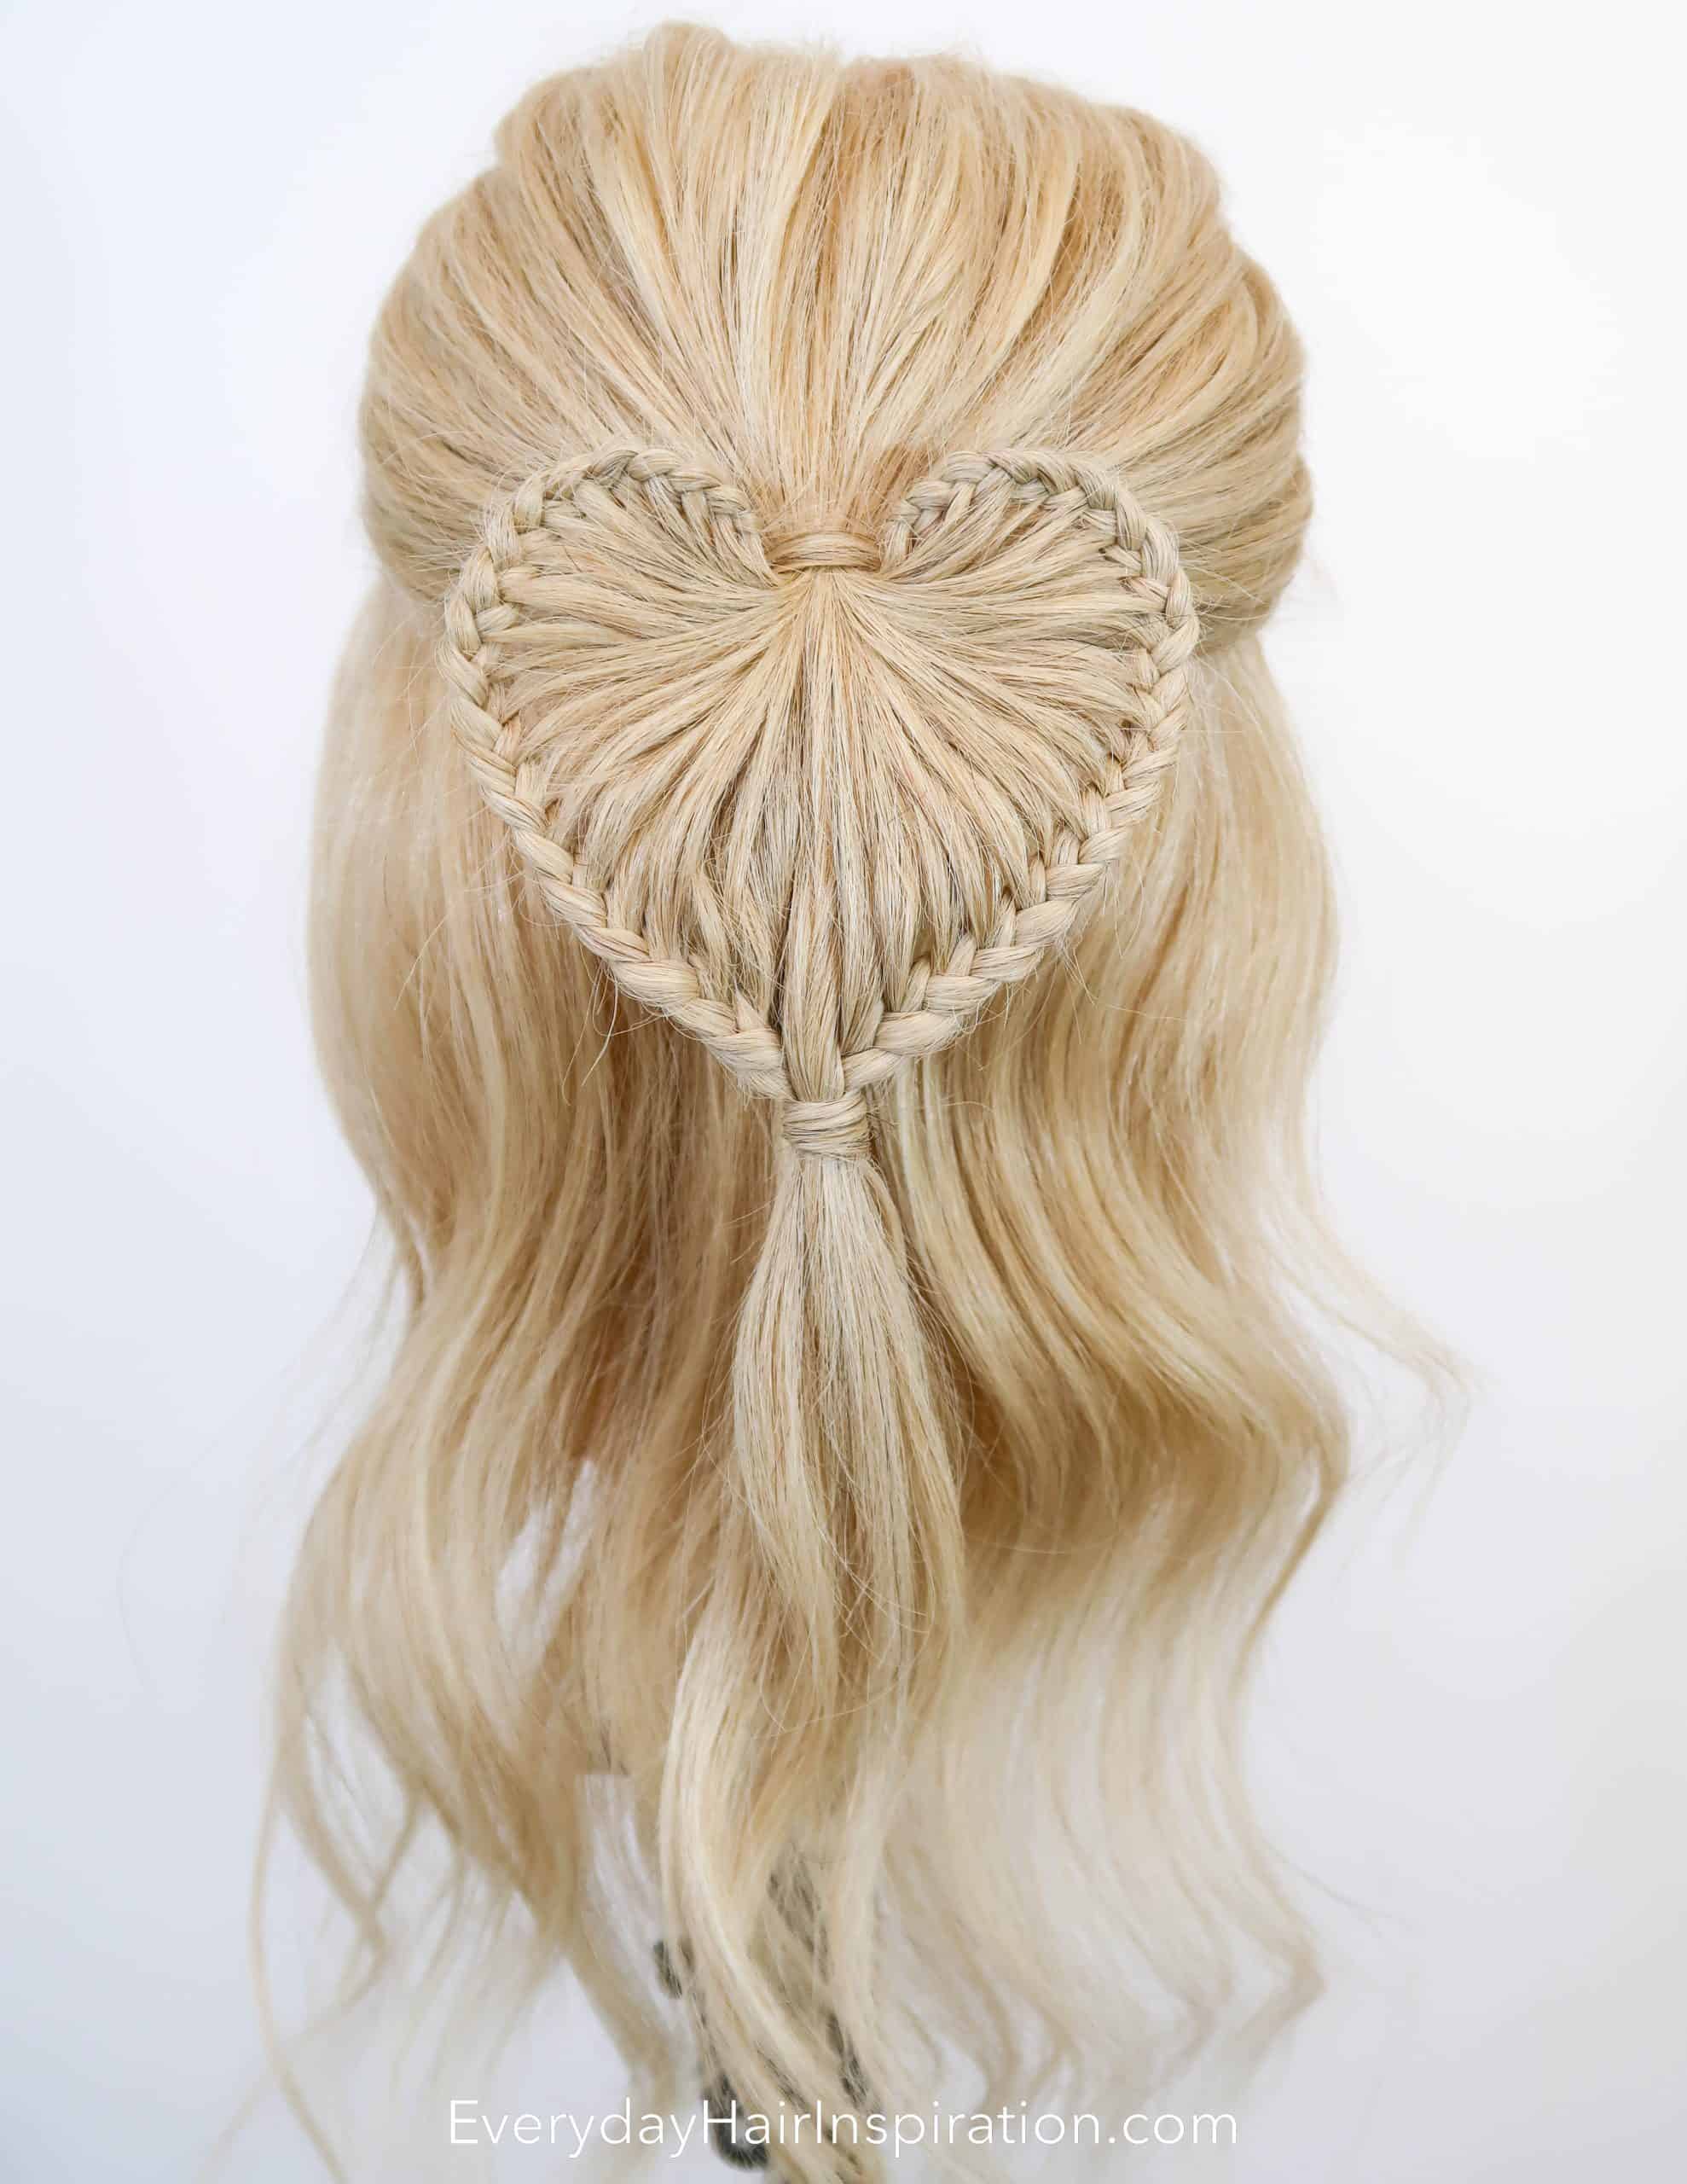 Image of Half-up, half-down hairstyle with braids for Valentine's Day